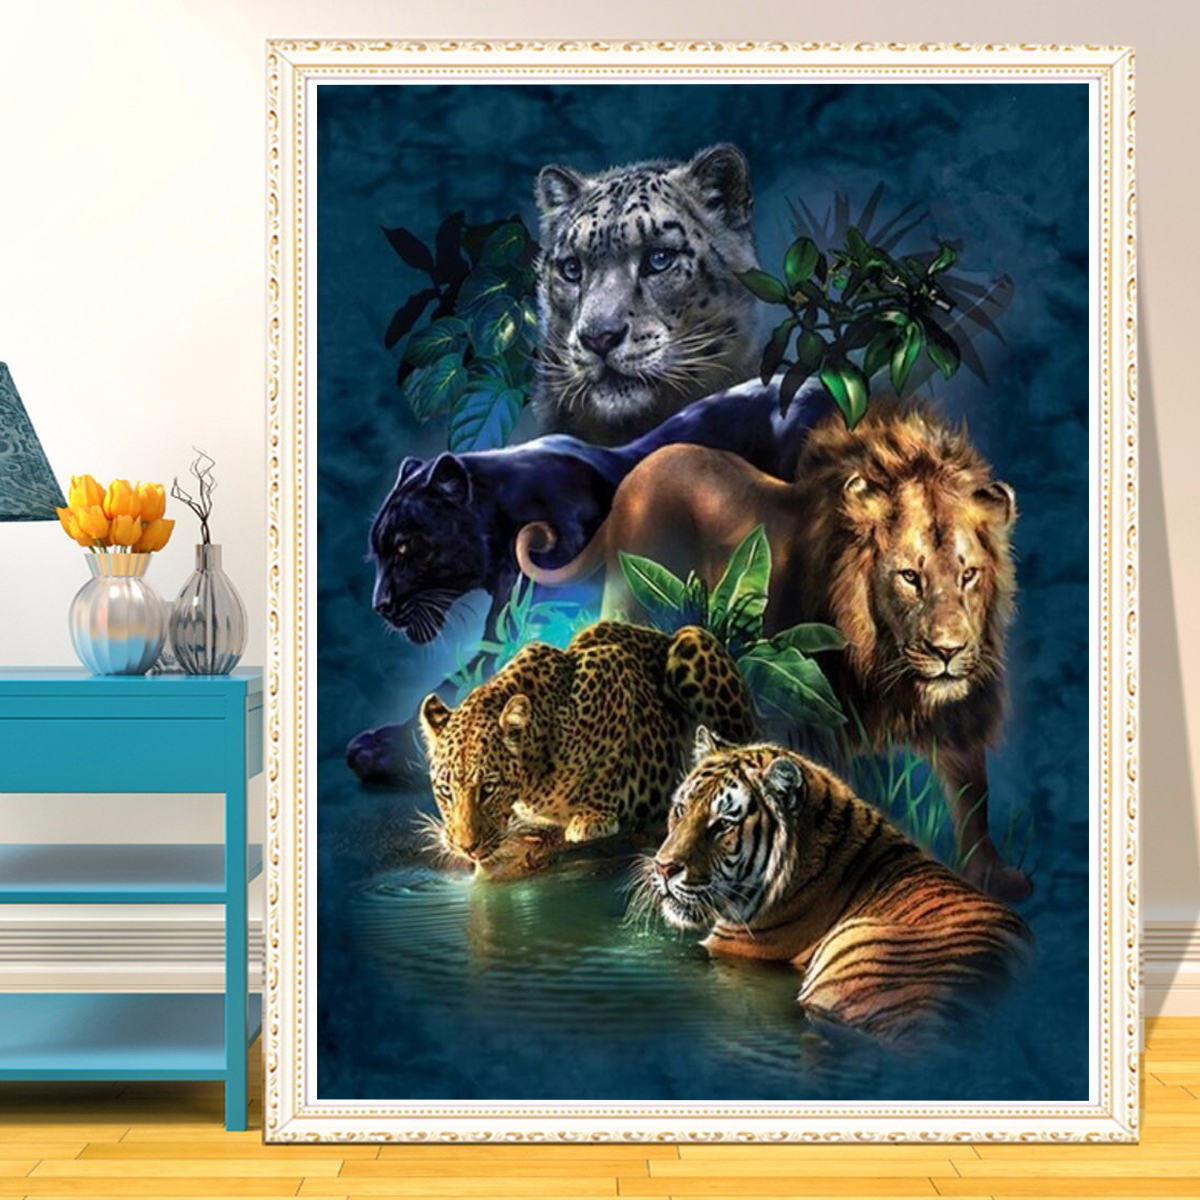 DIY-5D-Diamond-Paintings-Tiger-Lion-Embroidery-Cross-Crafts-Stitch-Tool-Kit-1633482-4